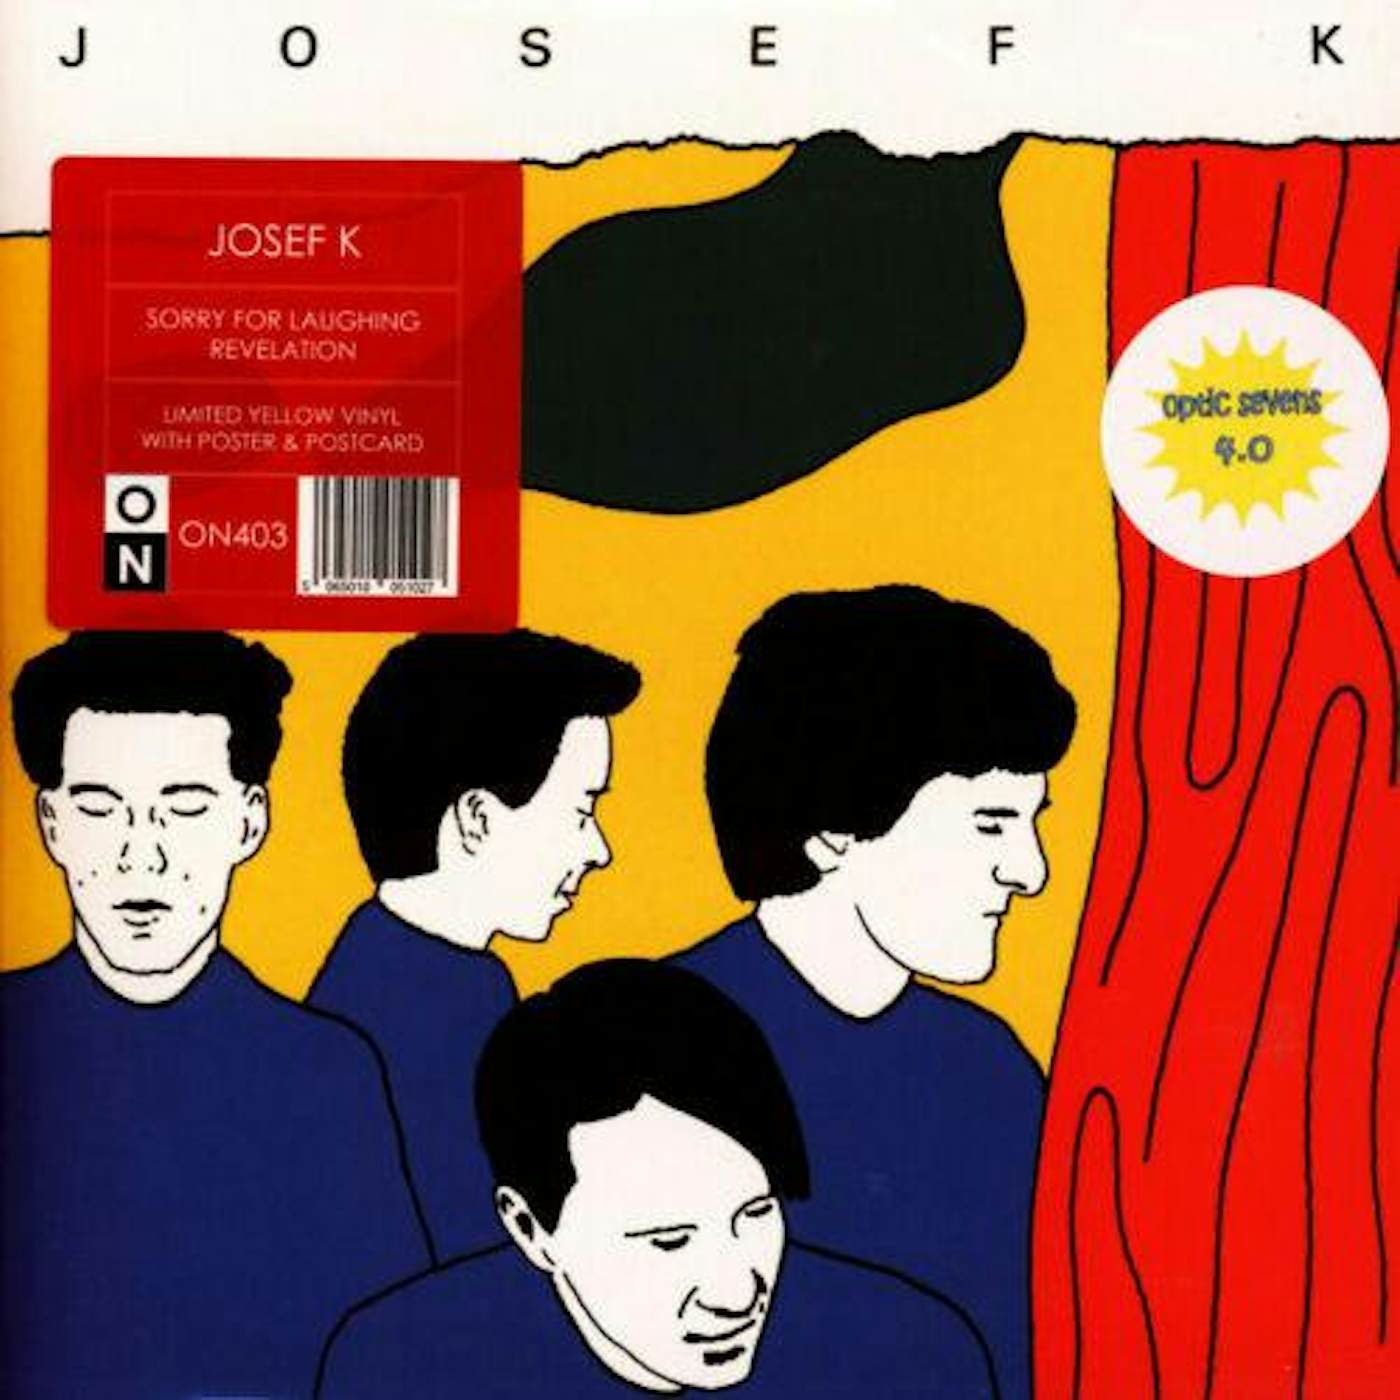 Josef K Sorry for Laughing Vinyl Record